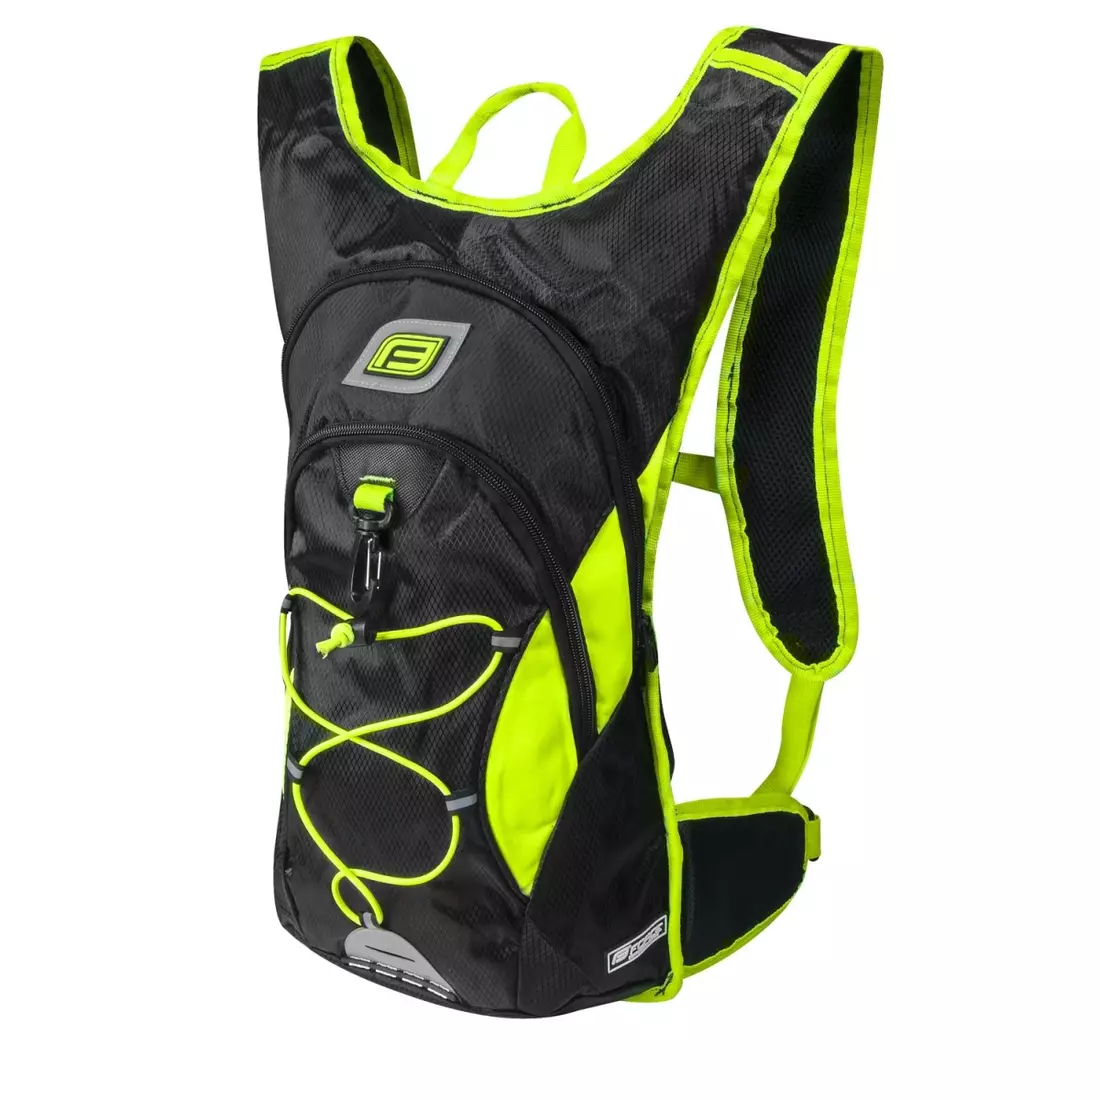 FORCE BERRY PRO 12L backpack 8967061 black and fluorine